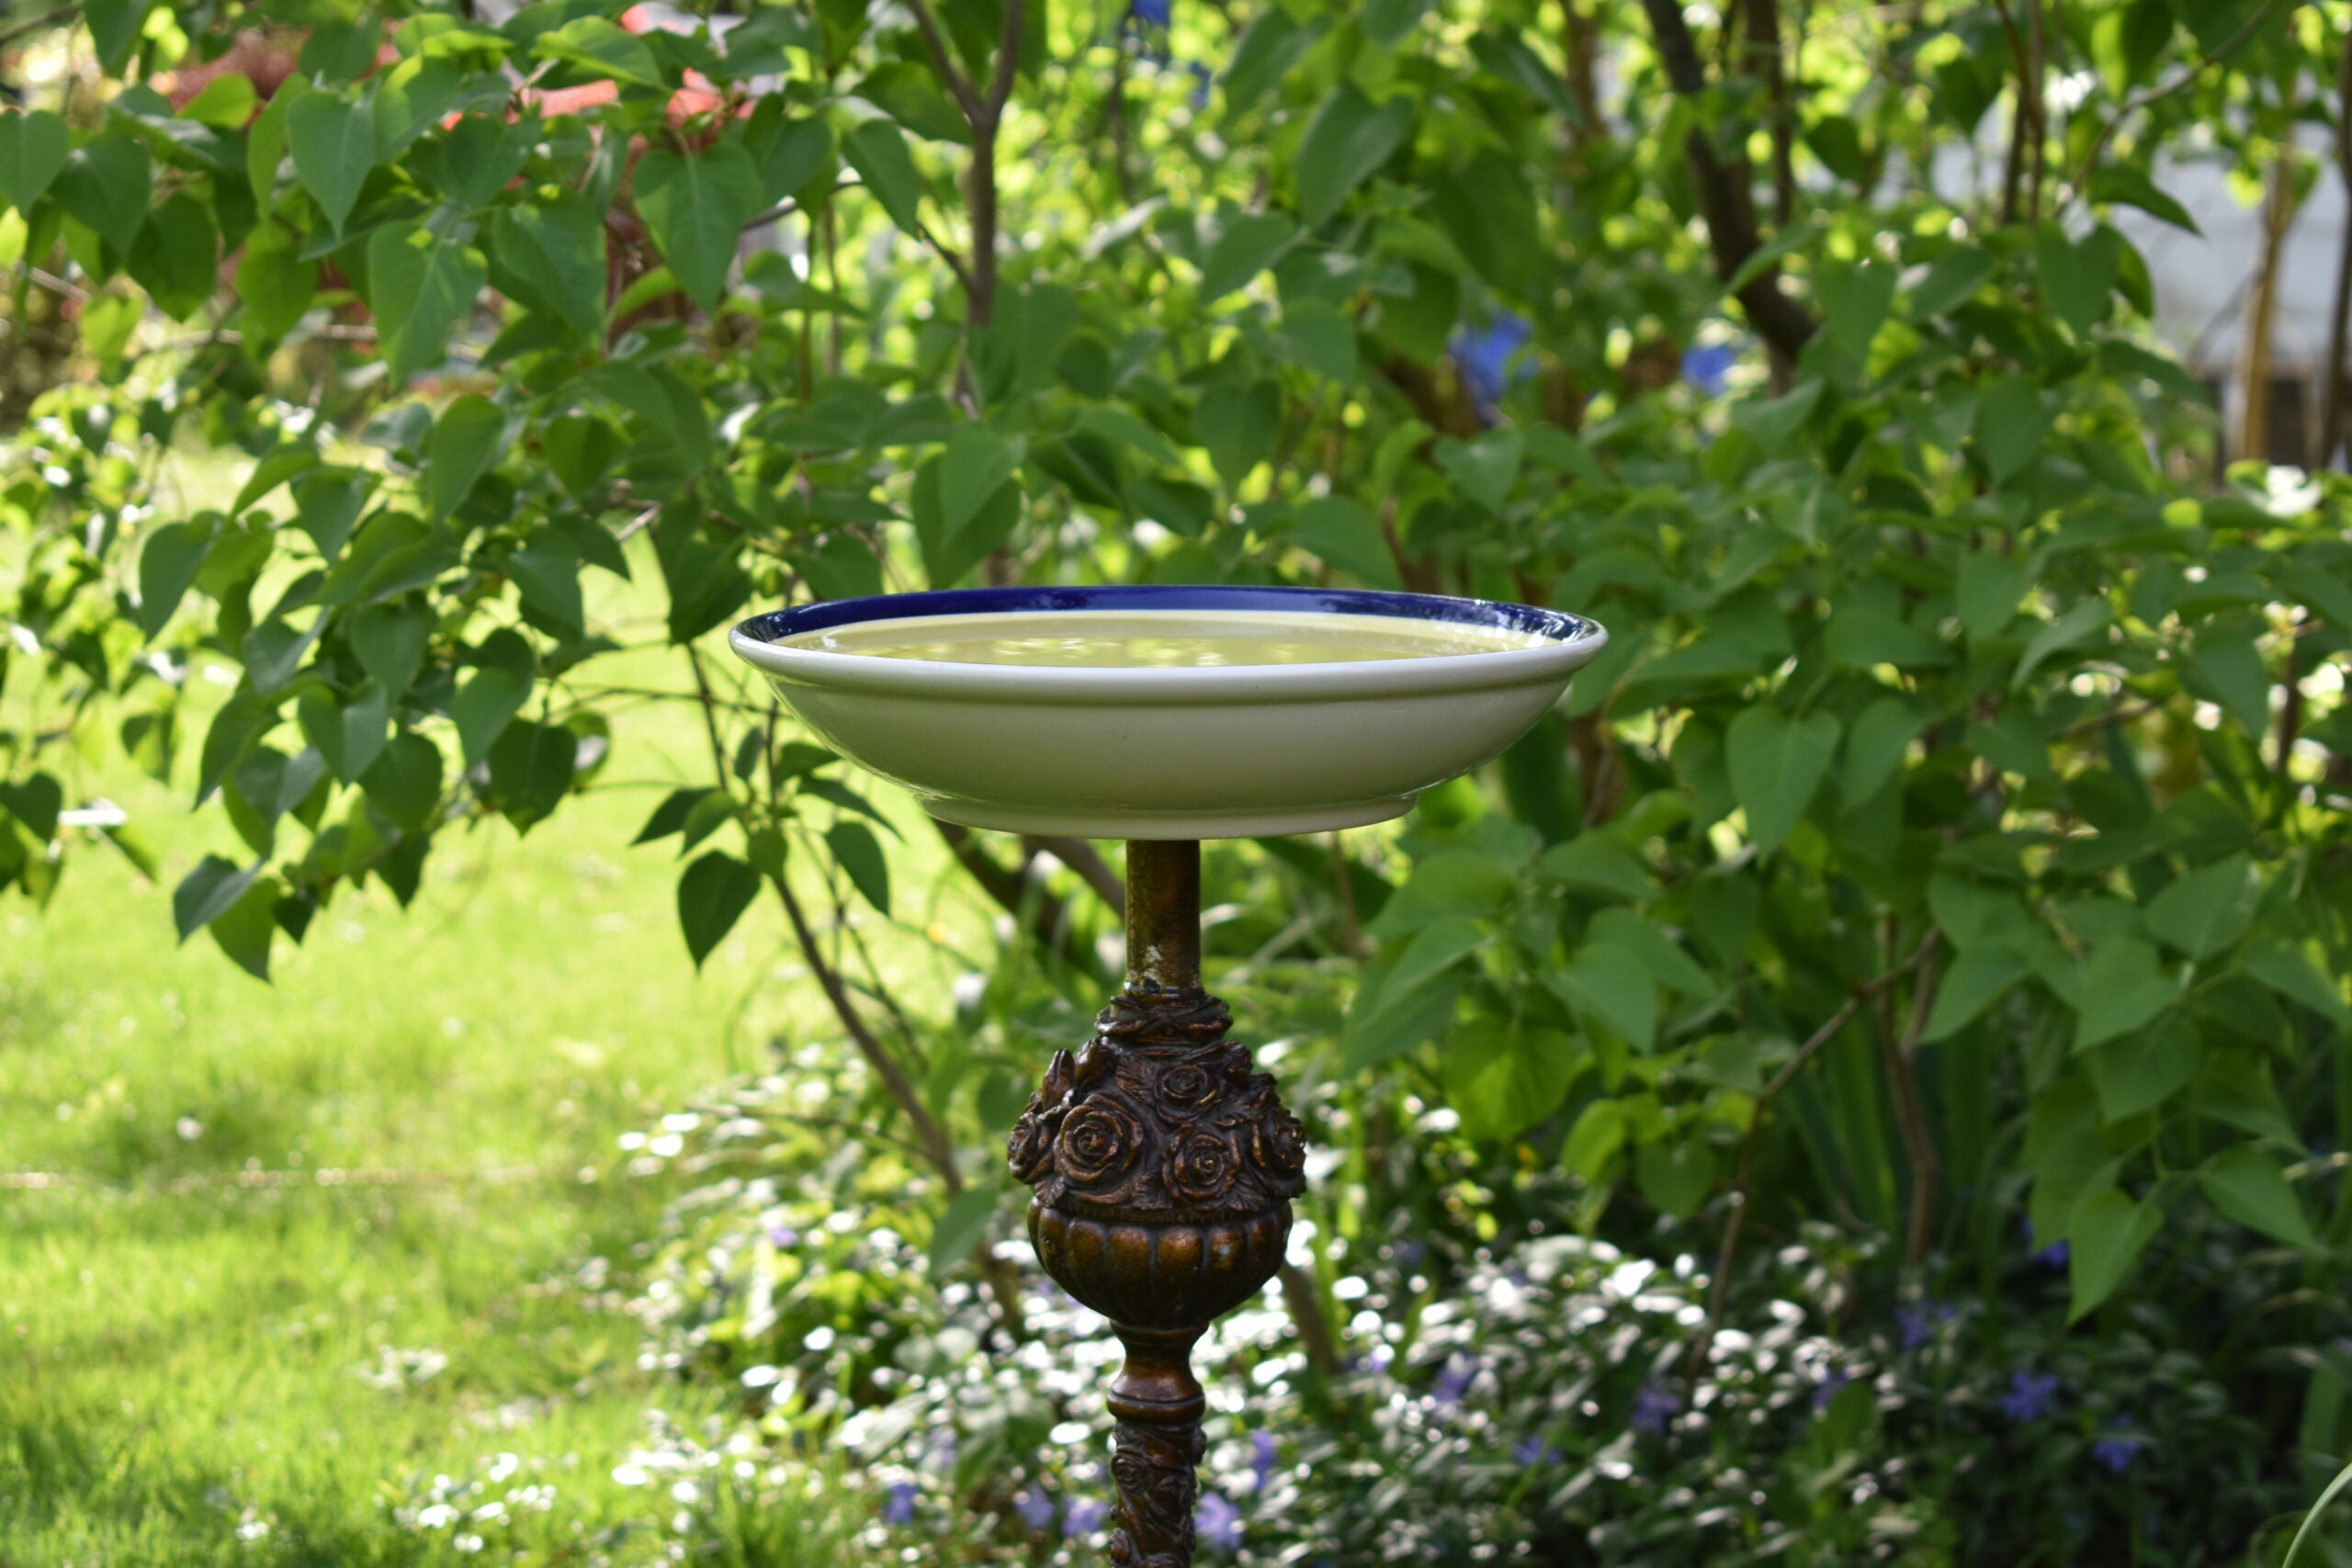 A DIY birdbath made out of a ceramic bowl and the stand from an antique lamp.